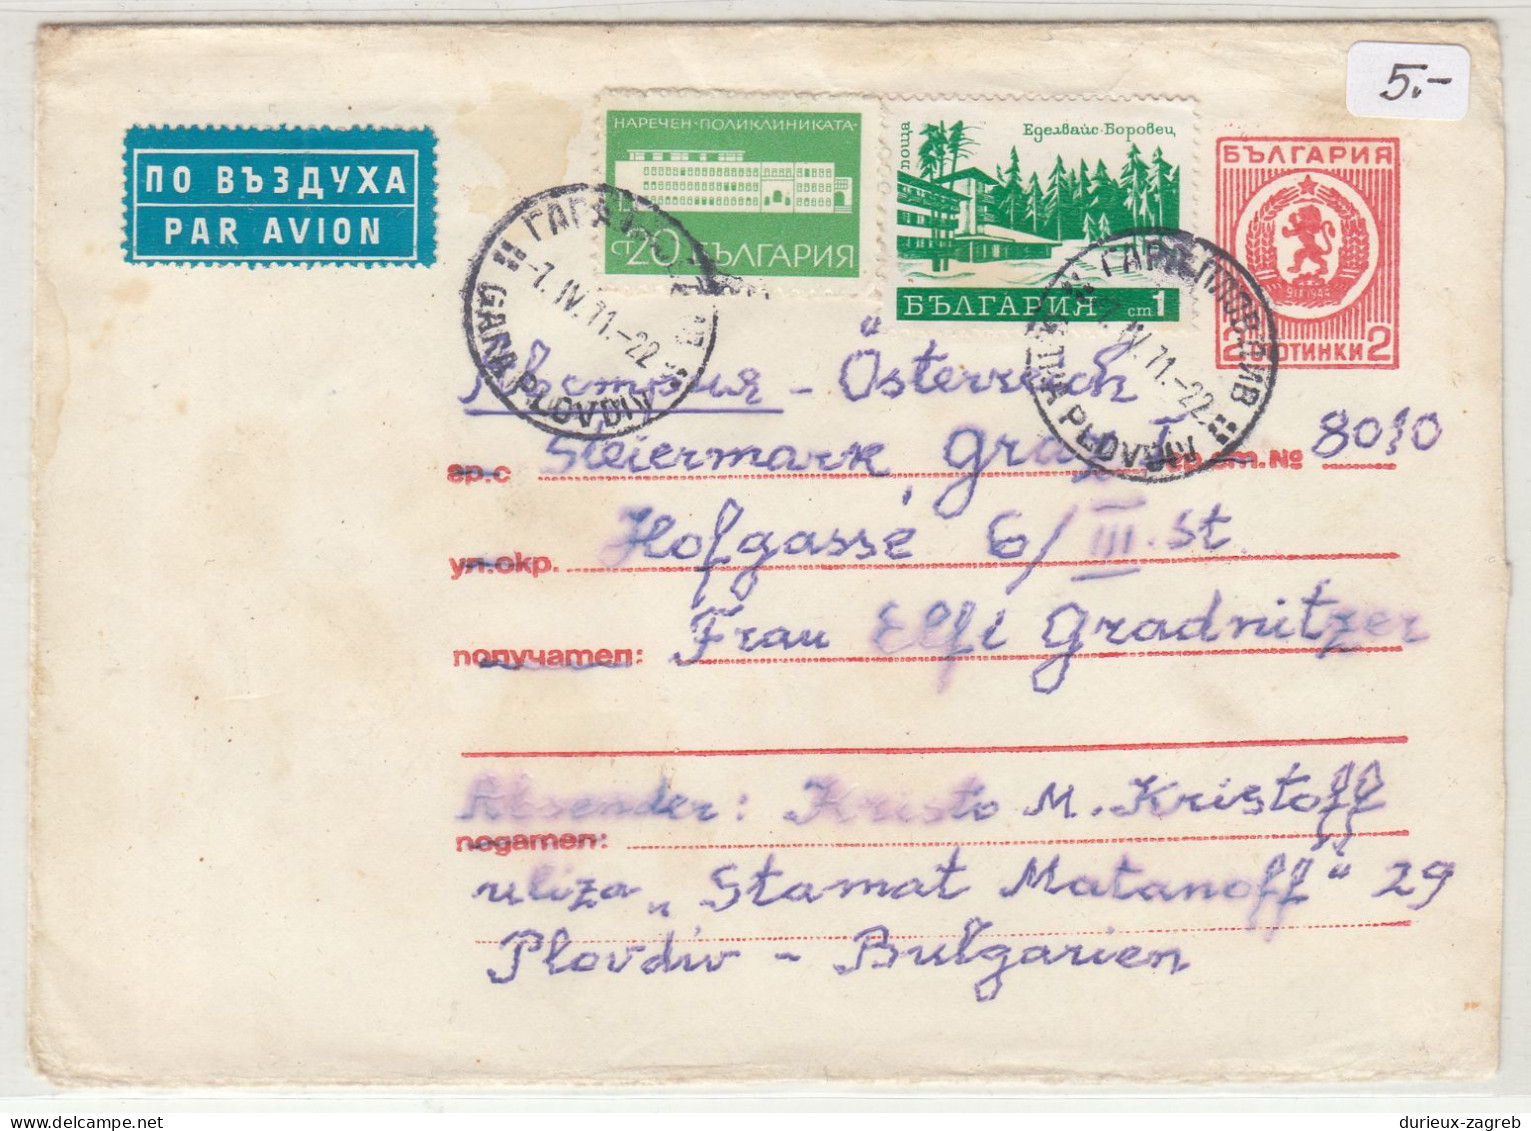 Bulgaria Postal Stationery Letter Cover Posted Air Mail 1971 Plovdiv To Graz - Uprated B240401 - Briefe